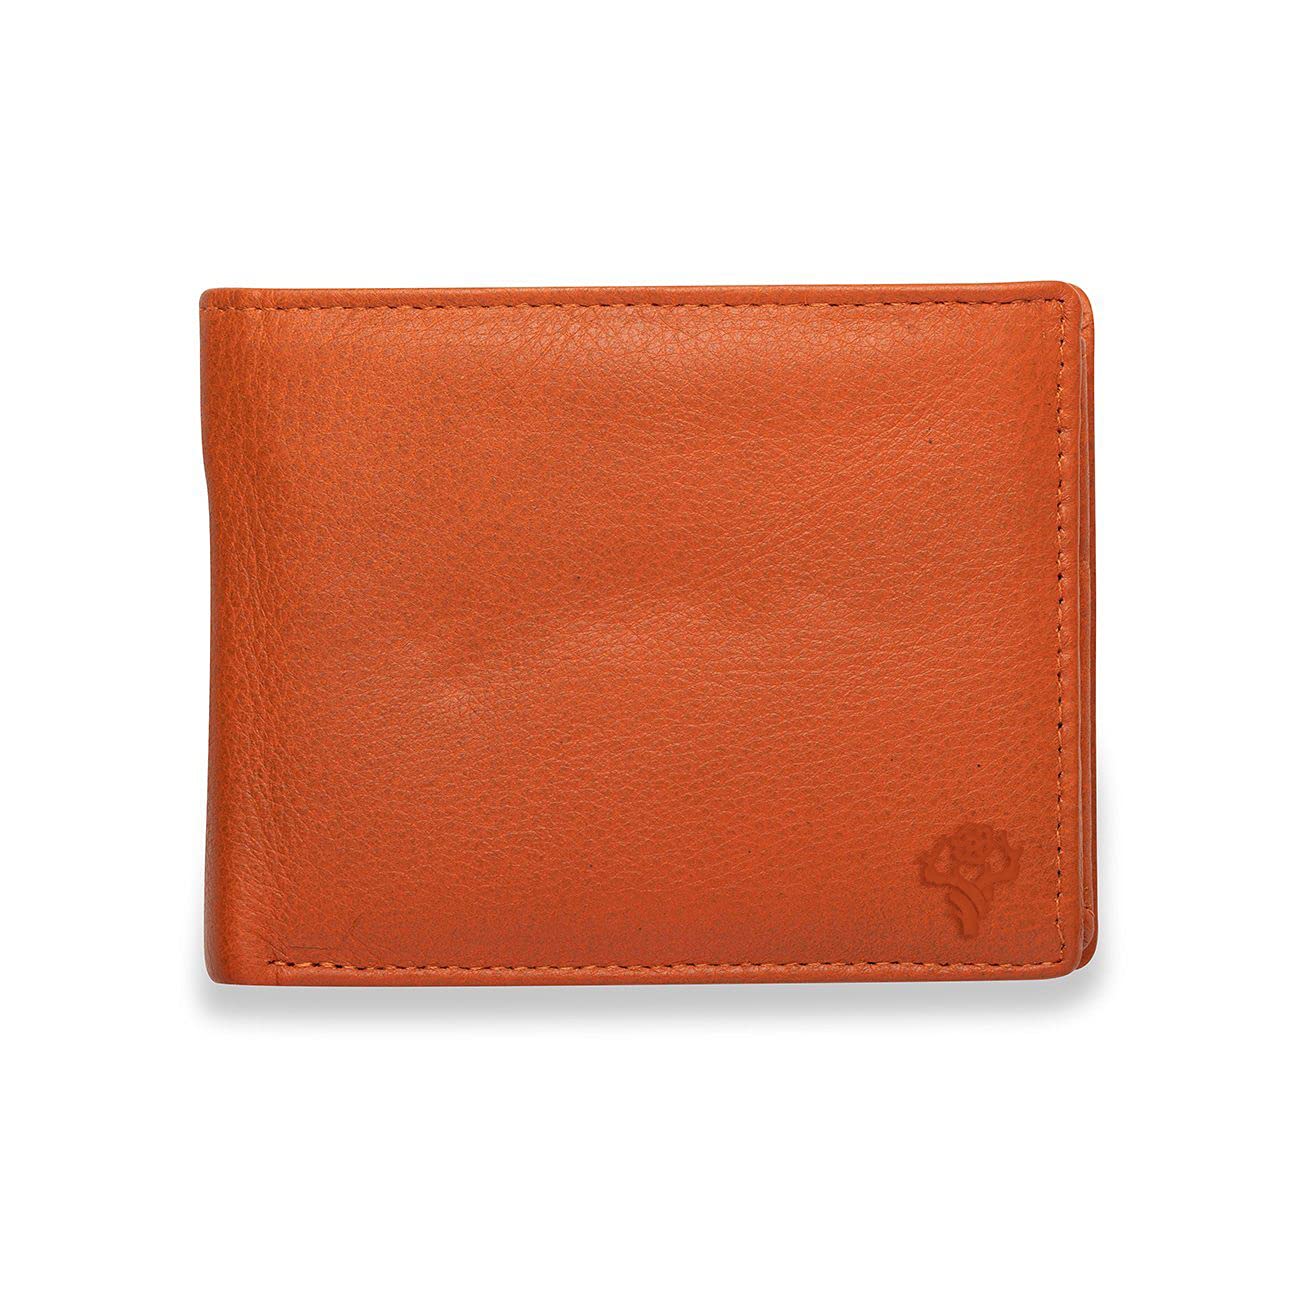 Buy Greenforest Men's Leather Wallet at Amazon.in